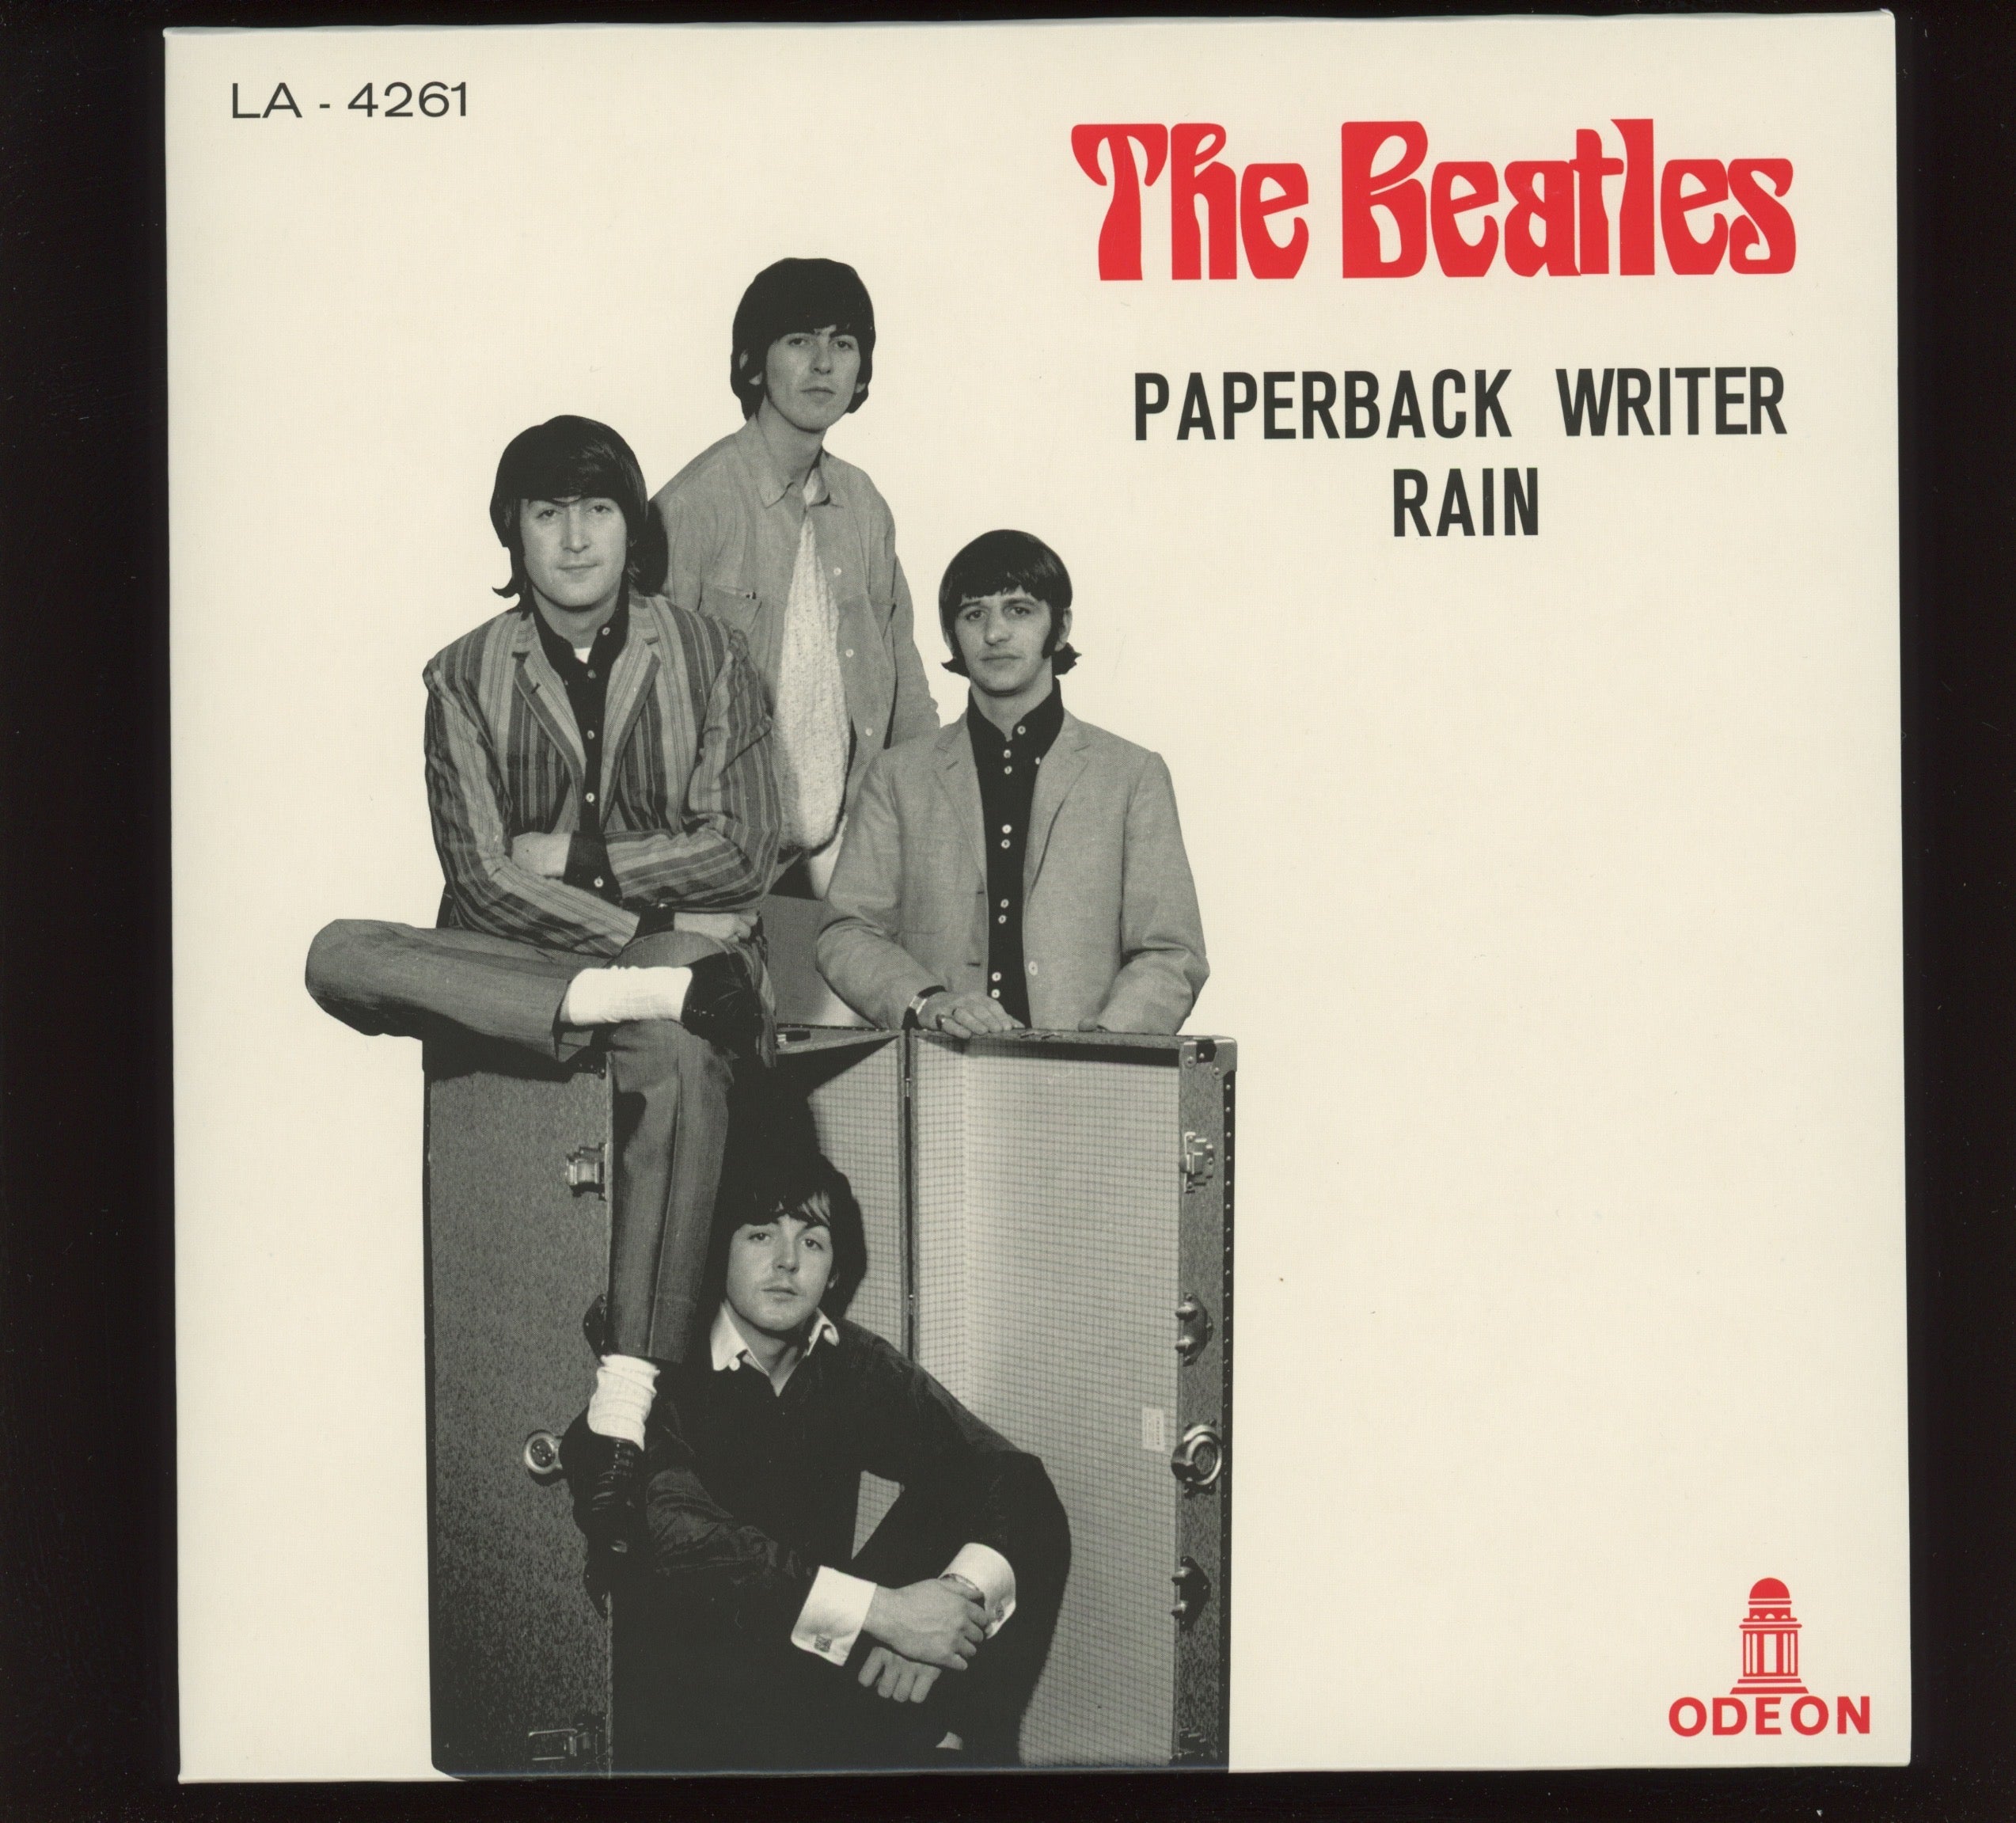 The Beatles - Paperback Writer / Rain on Odeon 7" Reissue With Picture Cover